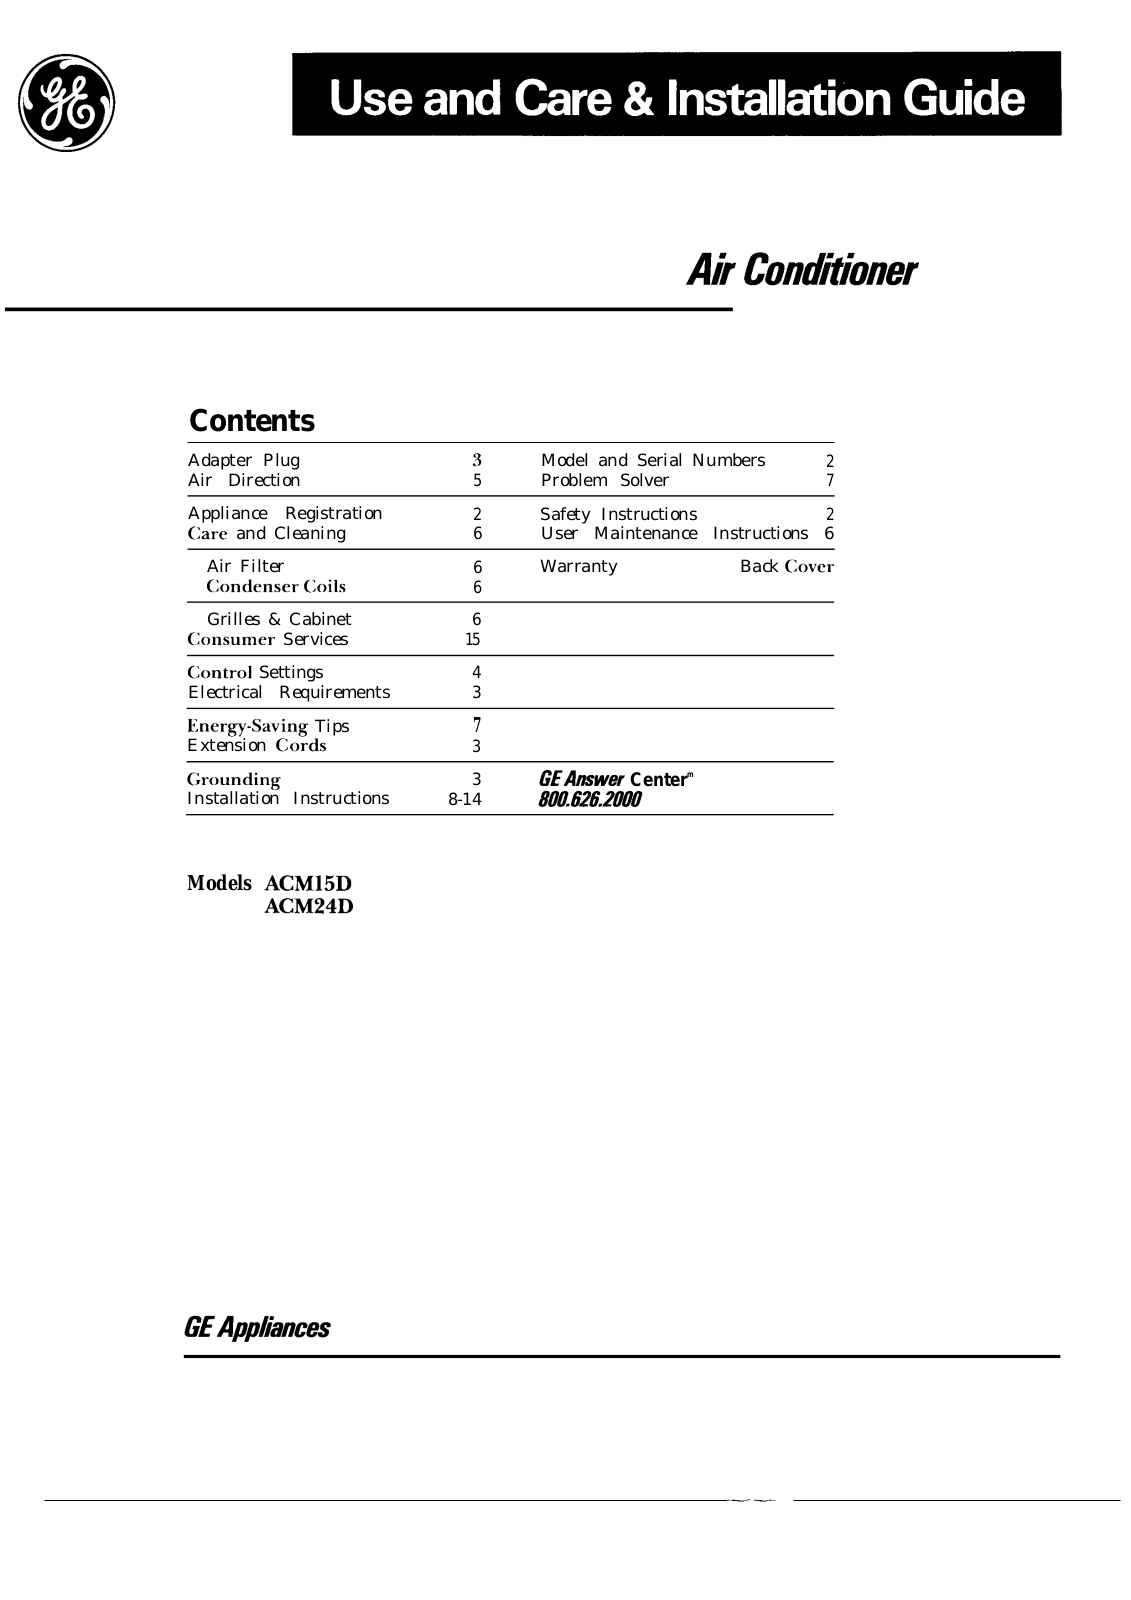 GE ACM15D, ACM24D Use and Care Guide